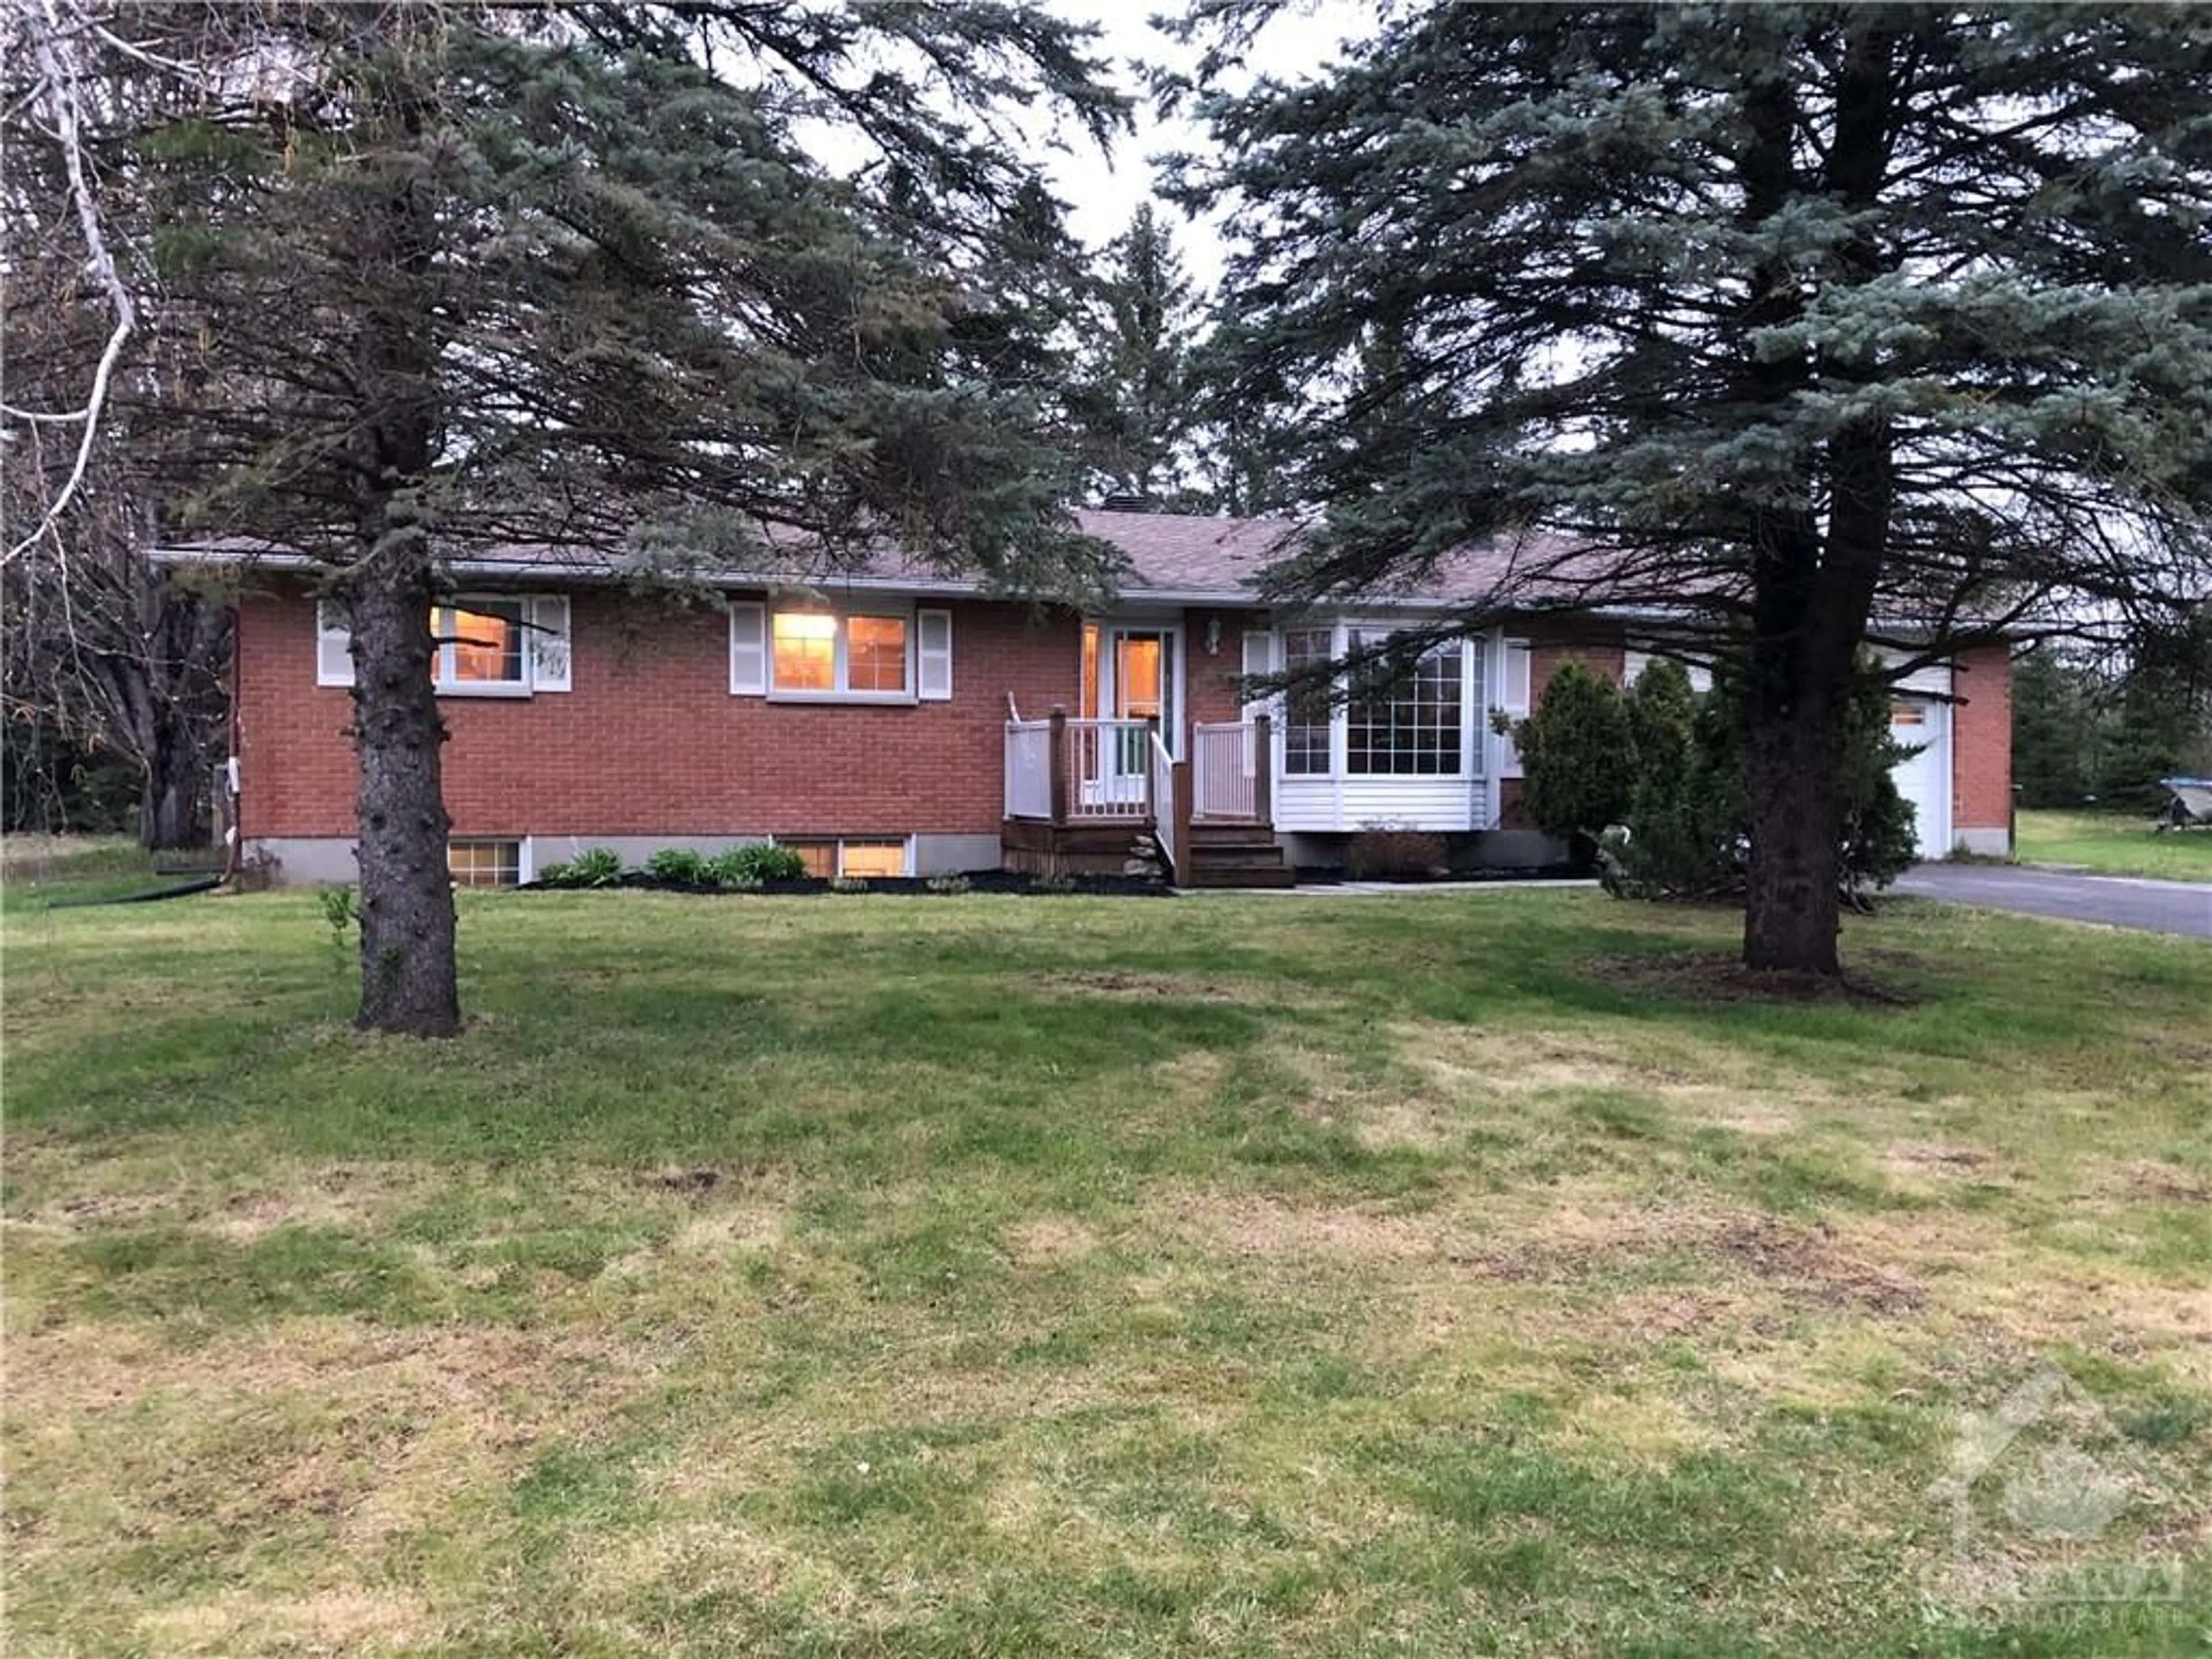 Frontside or backside of a home for 6300 ROTHBOURNE Rd, Carp Ontario K0A 1L0